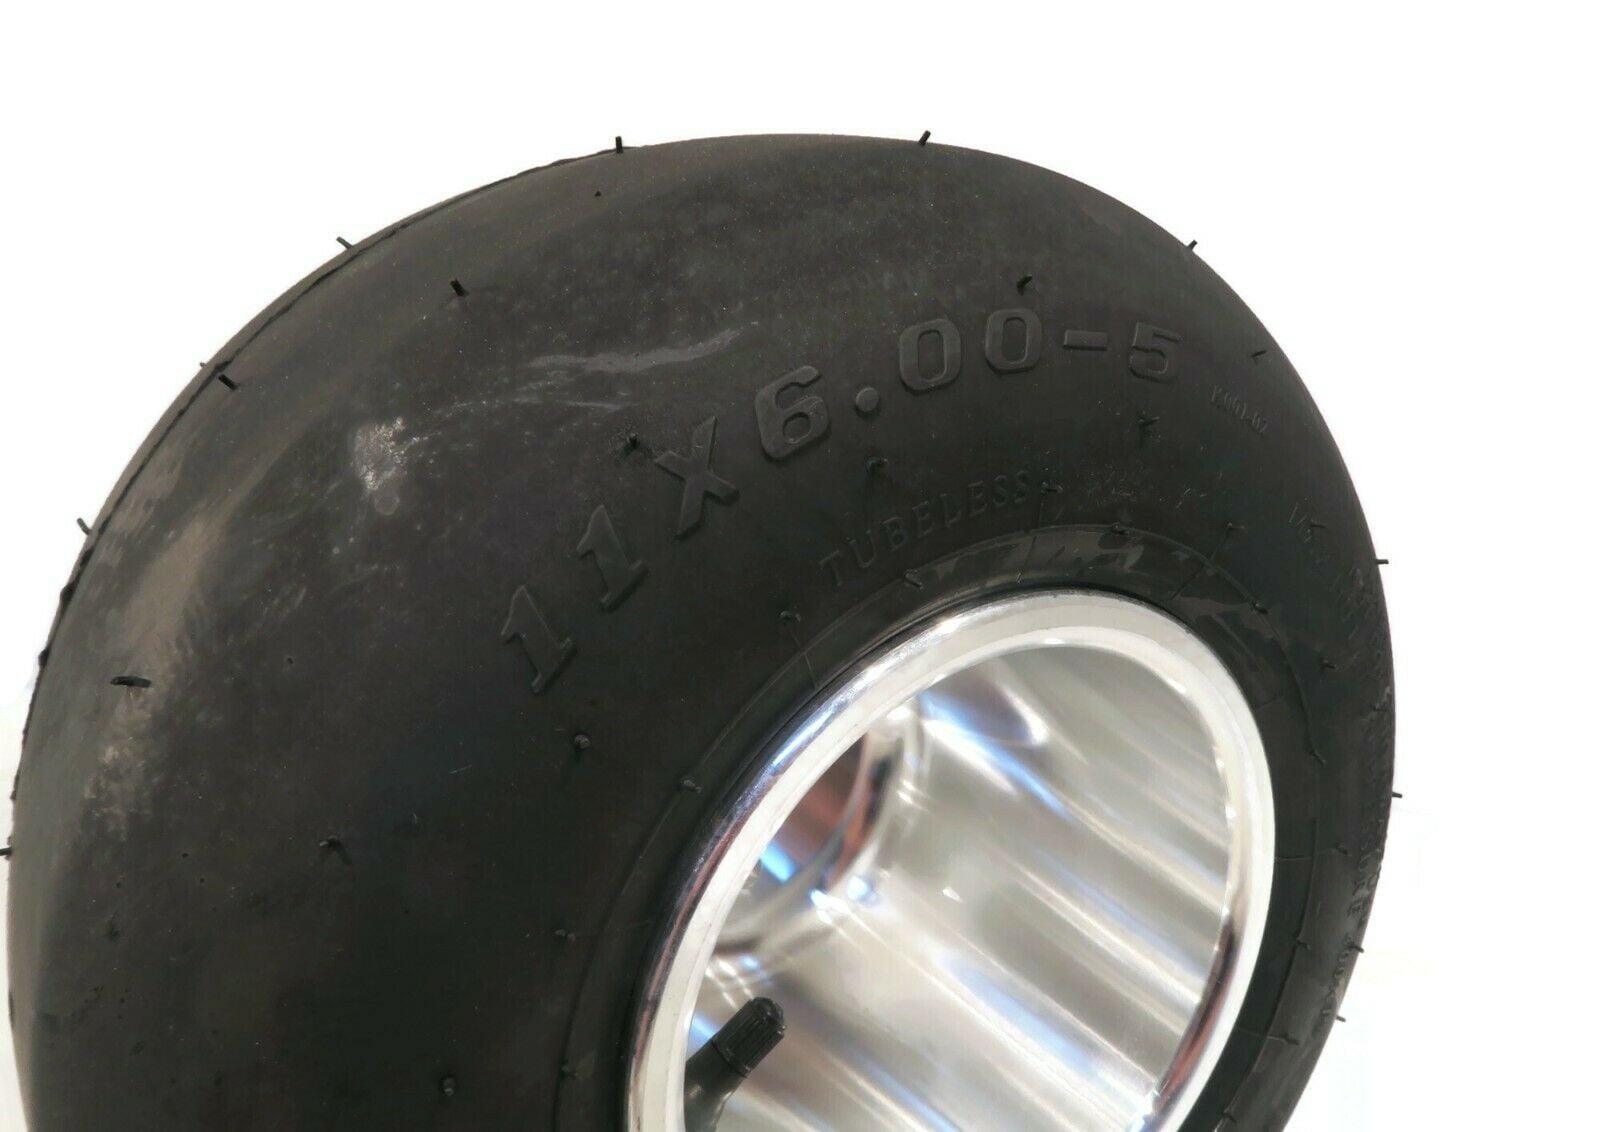 Tubeless Racing Slick Tire 11x6.00-5 with Aluminum Wheel for Go Kart Pack of 4 